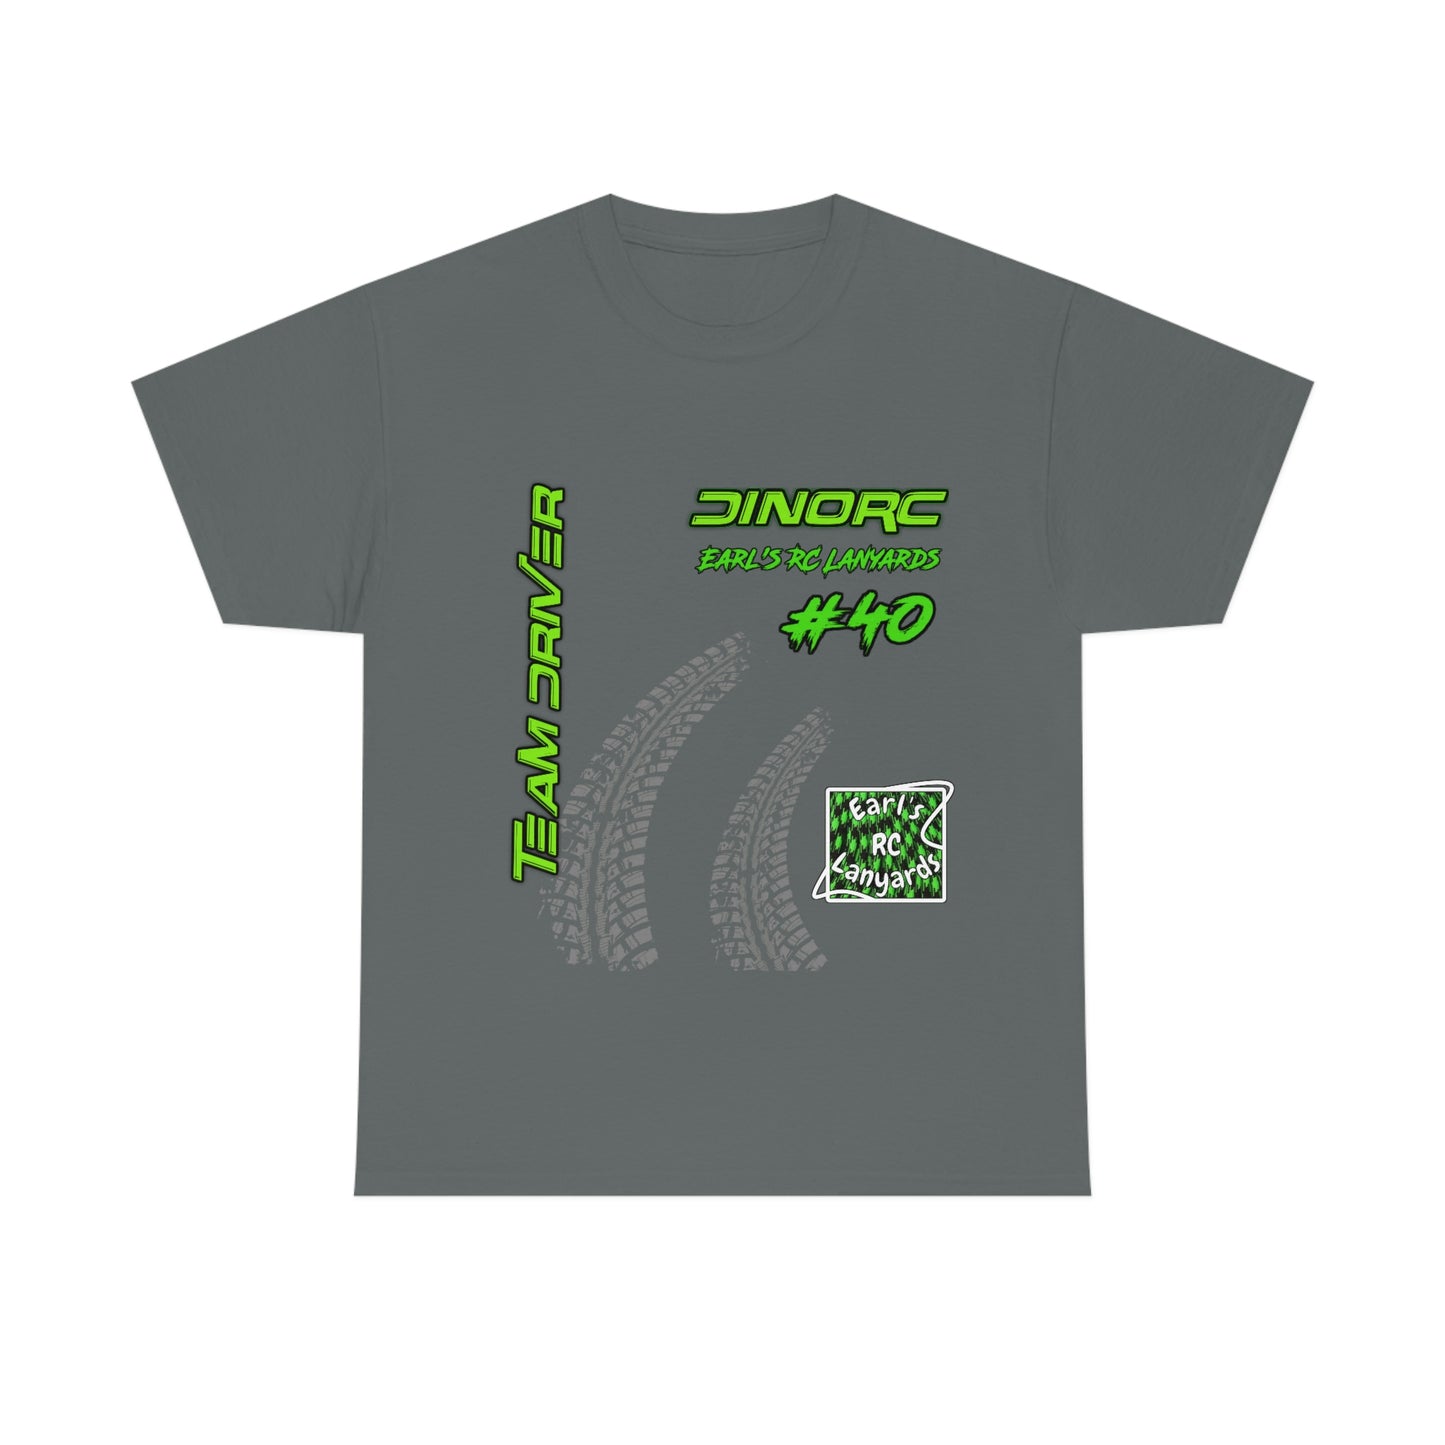 Team Driver Earl's RC Lanyards Front and Back DinoRc Logo T-Shirt S-5x 5 colors